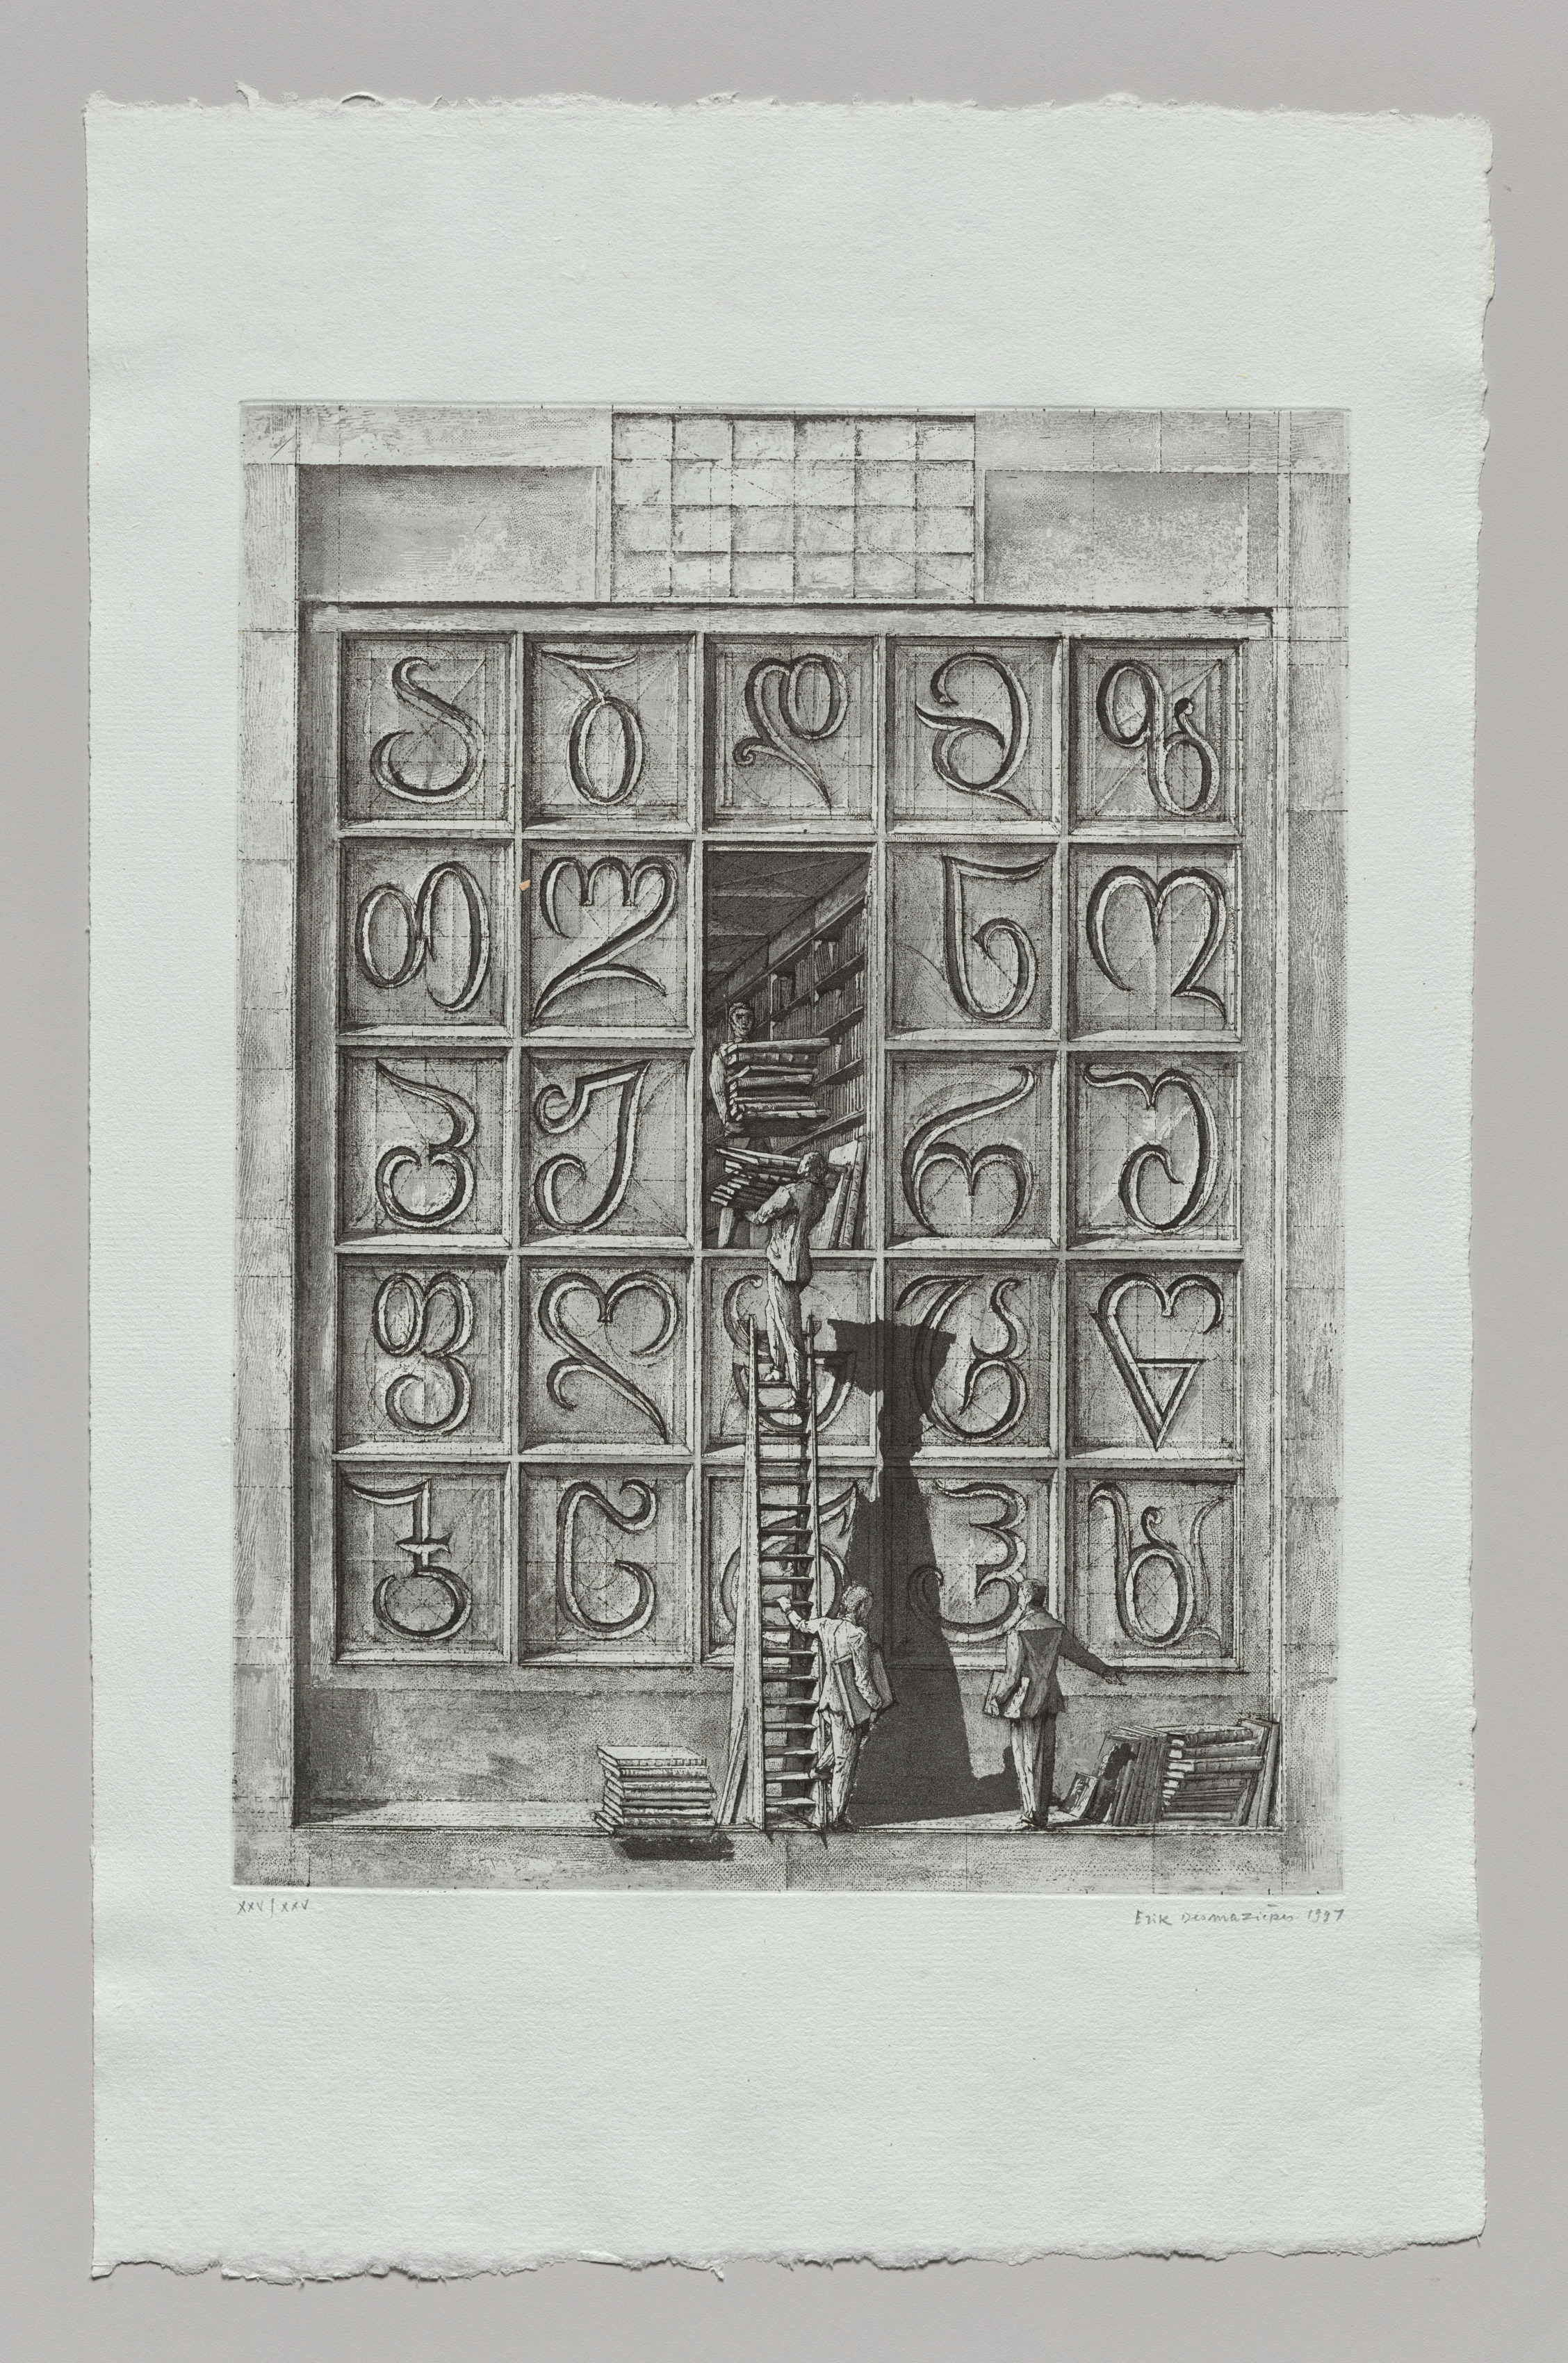 The Library of Babel: Imaginary Alphabet II